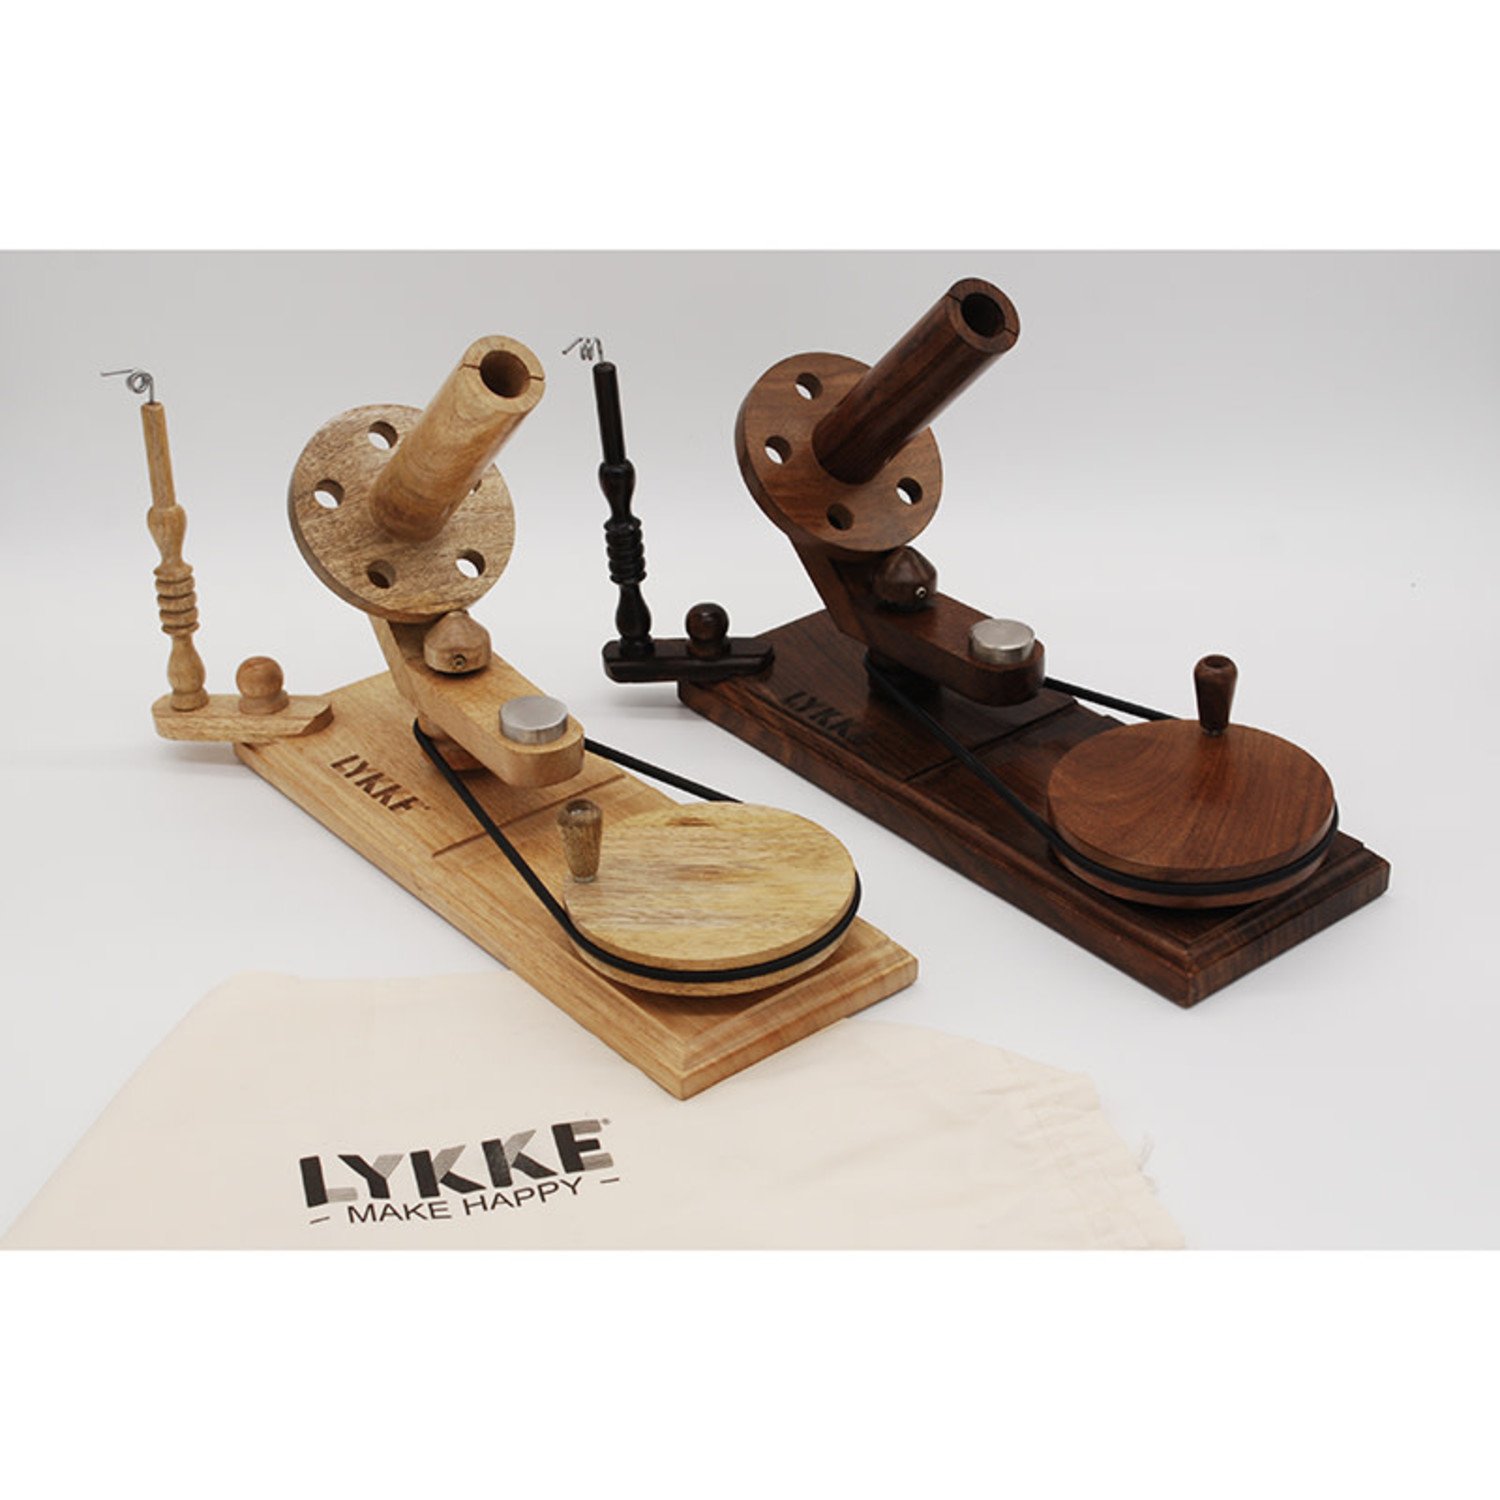 Lykke Ball Winder - Sealed with a Kiss